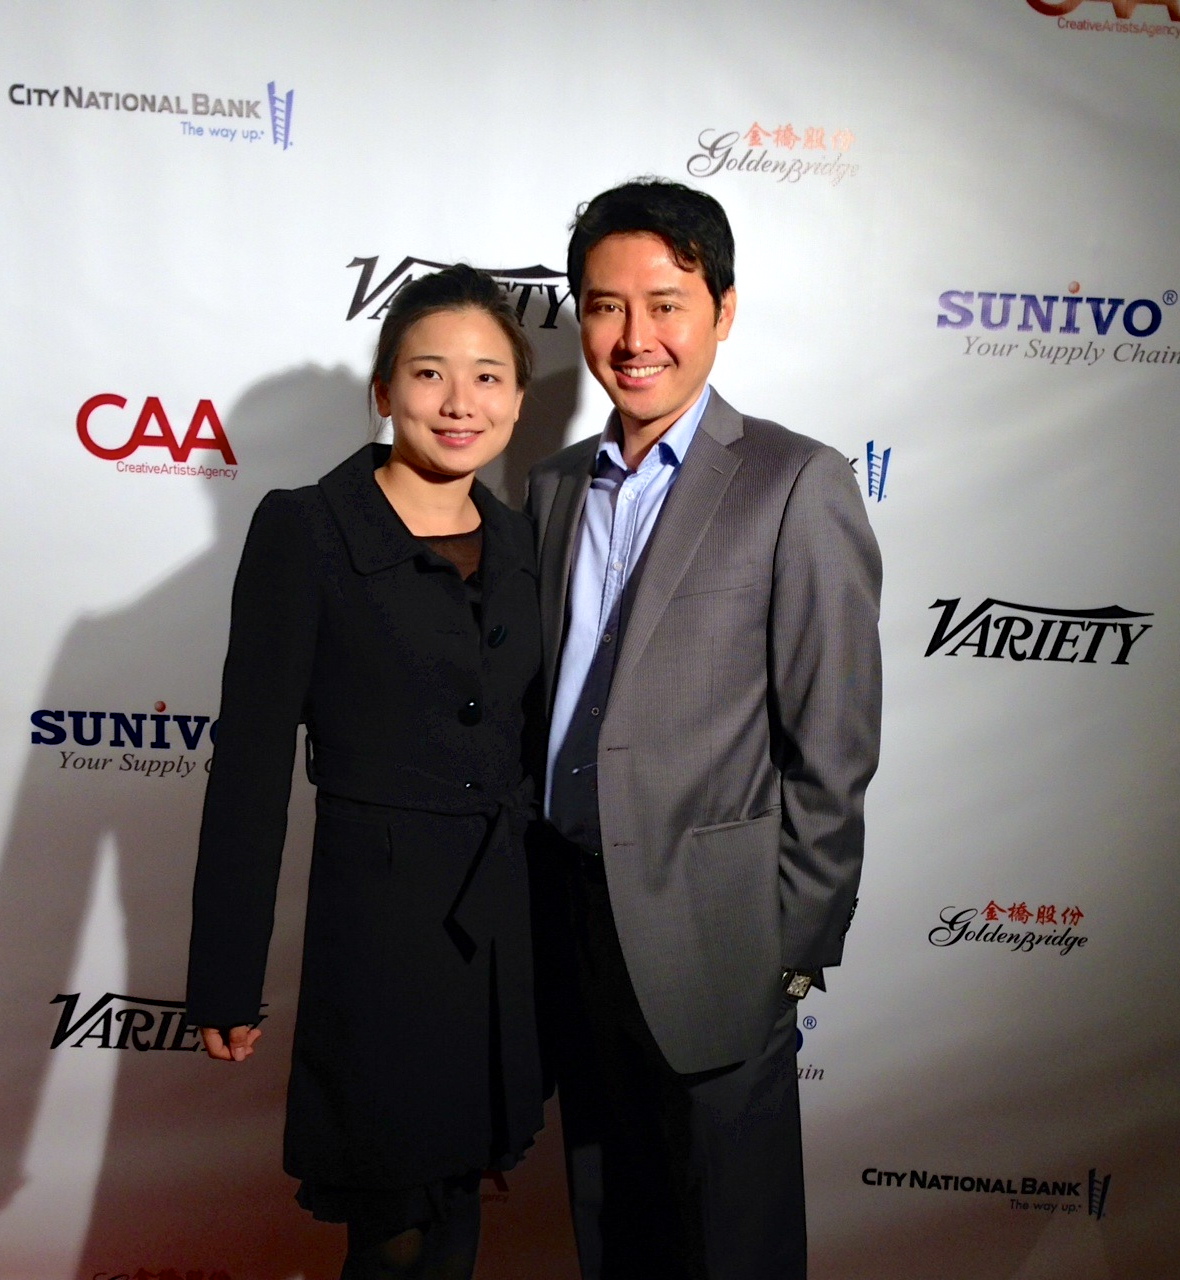 With filmmaker Ting Fang Liu at the ChinaNow Film & TV conference - Hyatt Regency, Century Plaza, Oct 2, 2013.